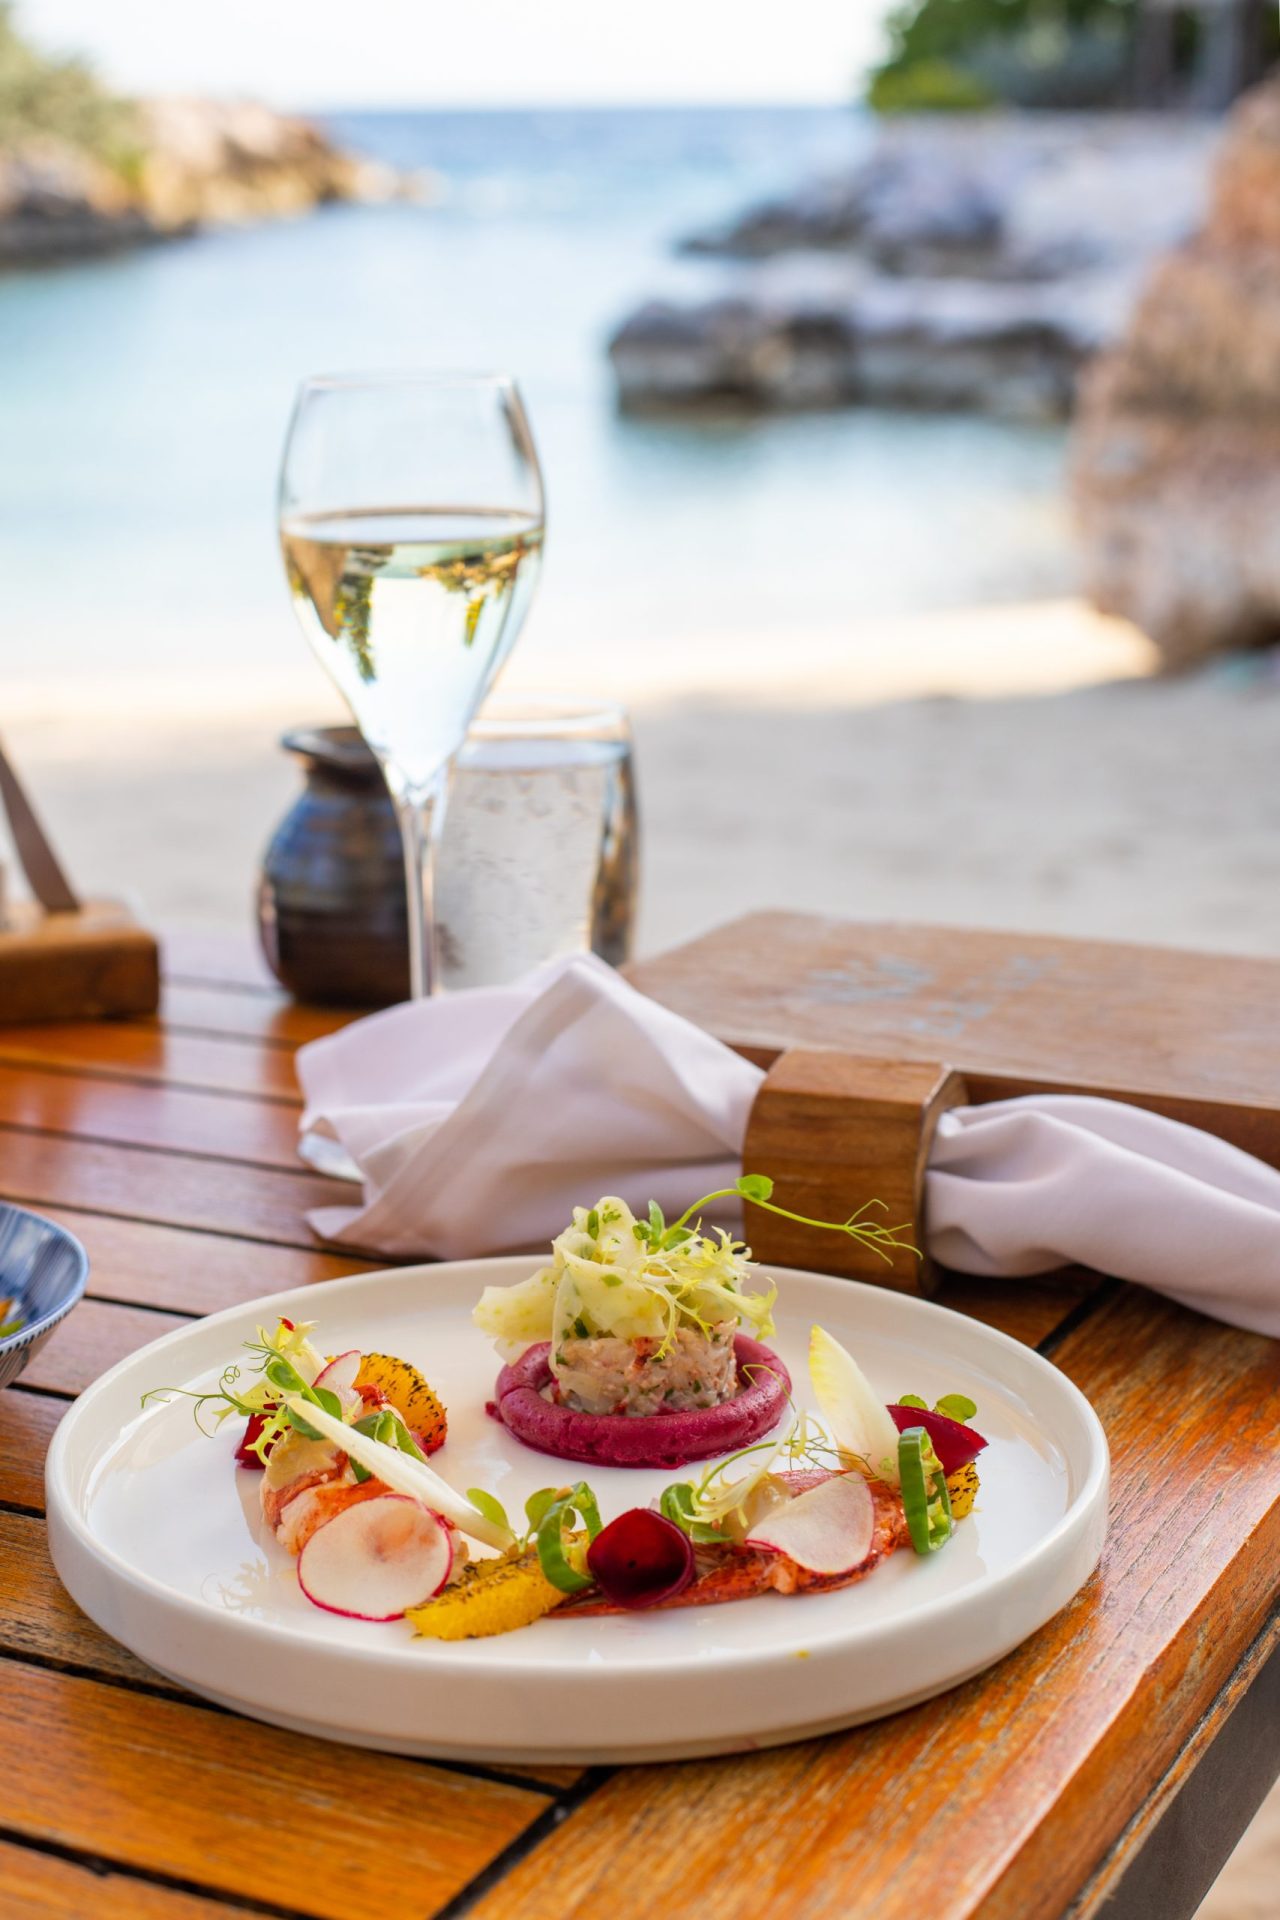 A plate of food and a glass of wine on a table with the beach in the background